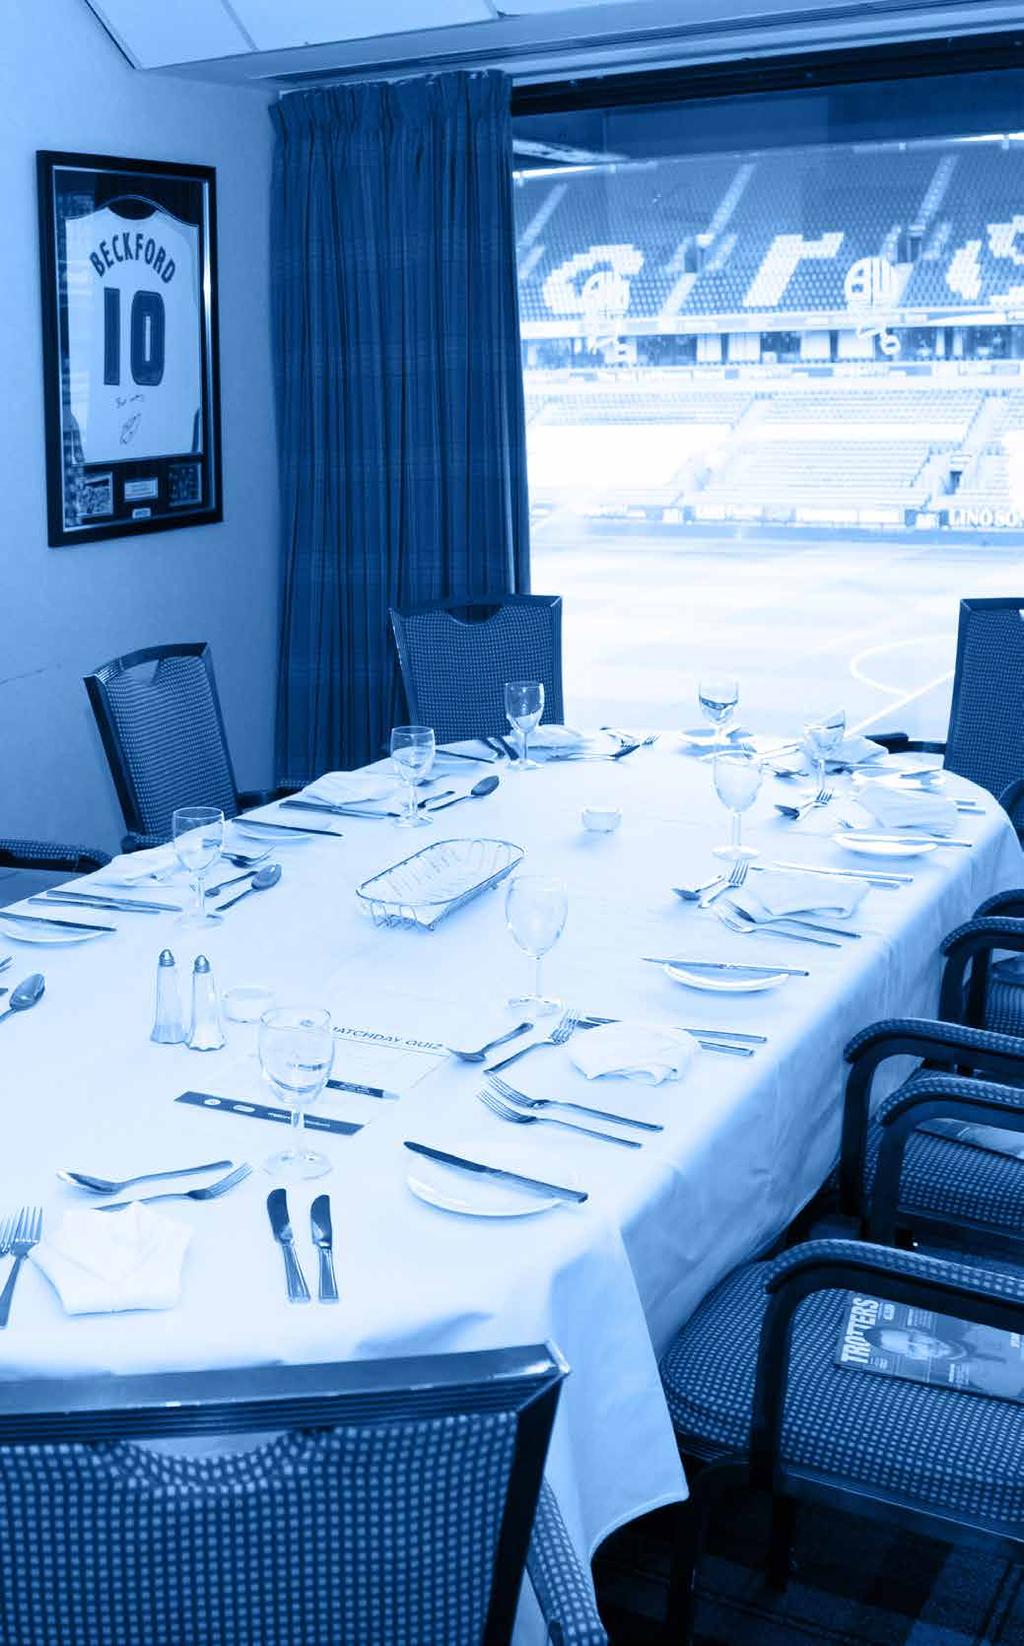 PRIVATE EXECUTIVE BOX PRIVATE EXECUTIVE BOX A private Executive Box with Bolton Wanderers Football Club offers the height of prestige and privacy.